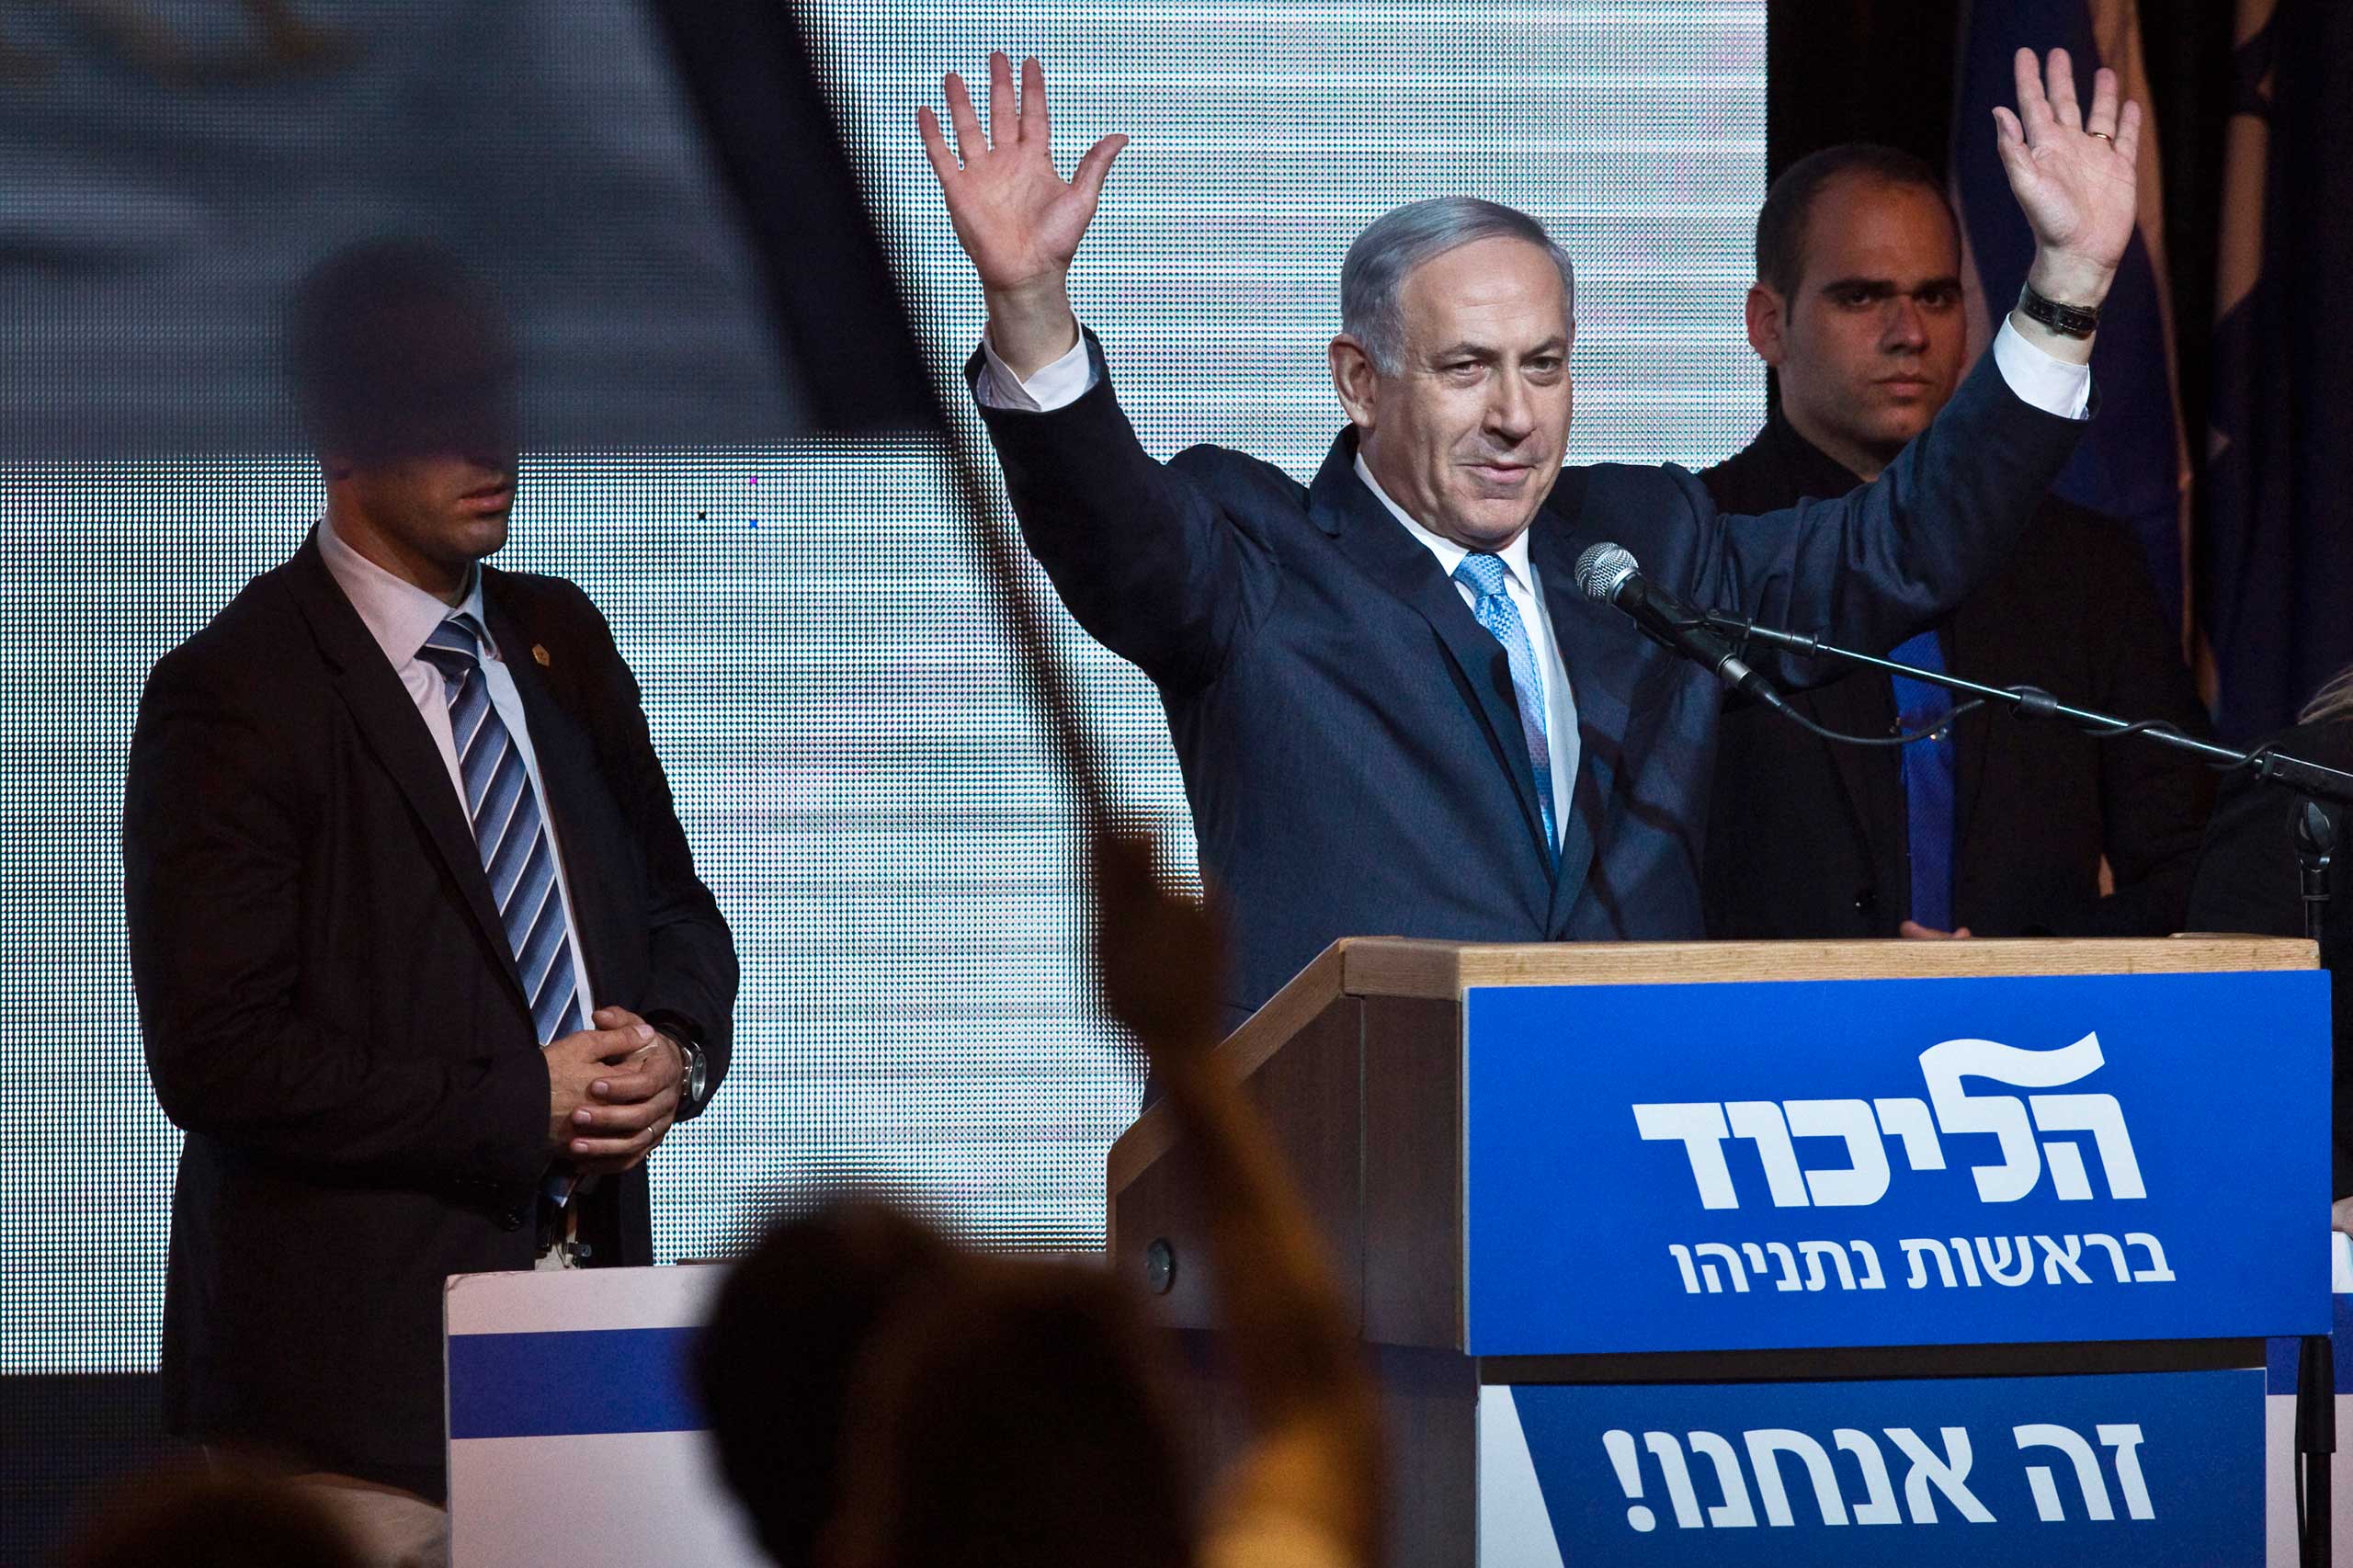 Israeli Prime Minister Benjamin Netanyahu delivers a speech to supporters at party headquarters in Tel Aviv on March 18, 2015. (Nir Elias—Reuters)